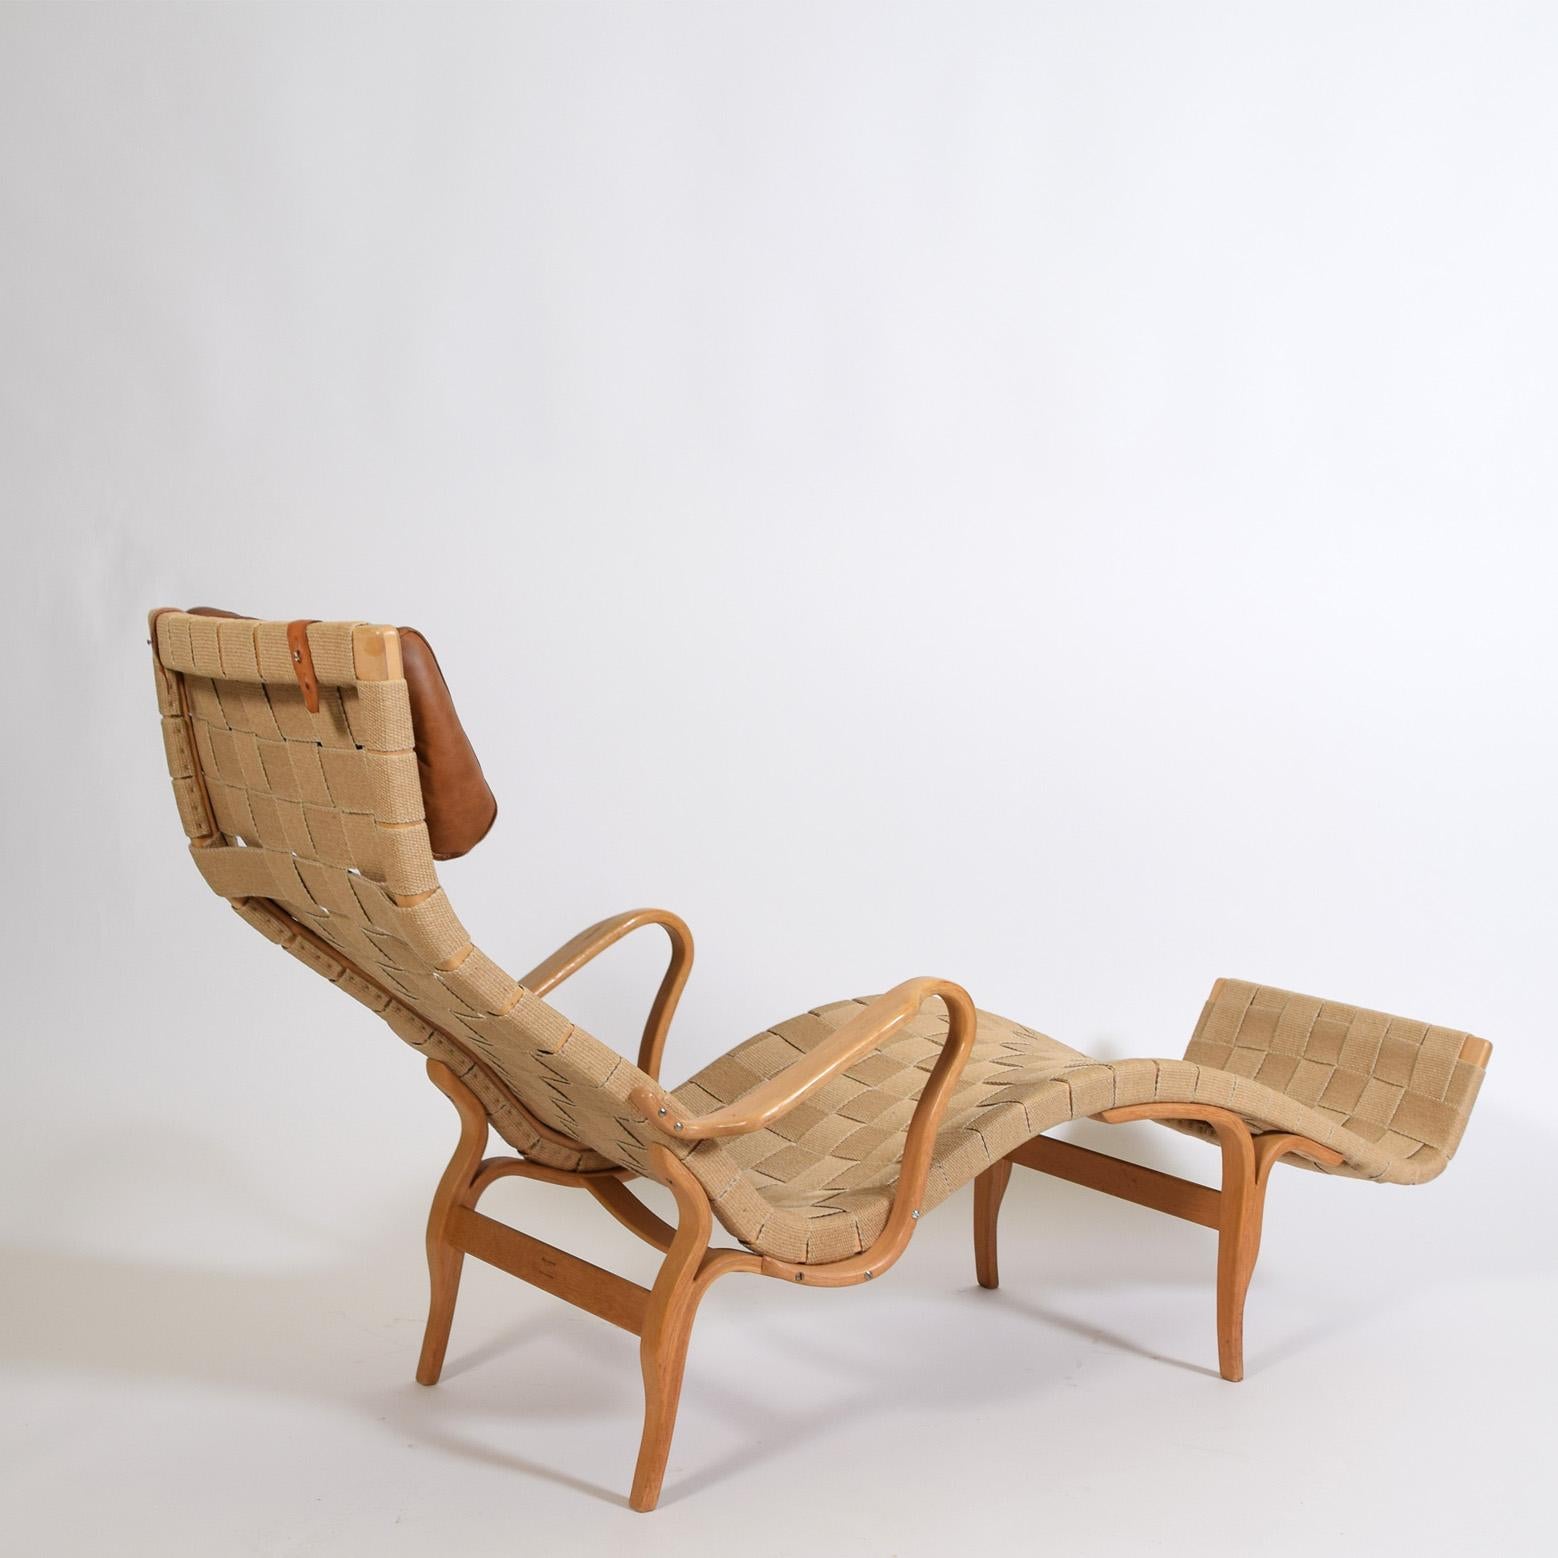 Signed Bruno Mathsson 'Pernila three' chaise longue with frame of laminated beechwood and straps made by Karl Mathsson.